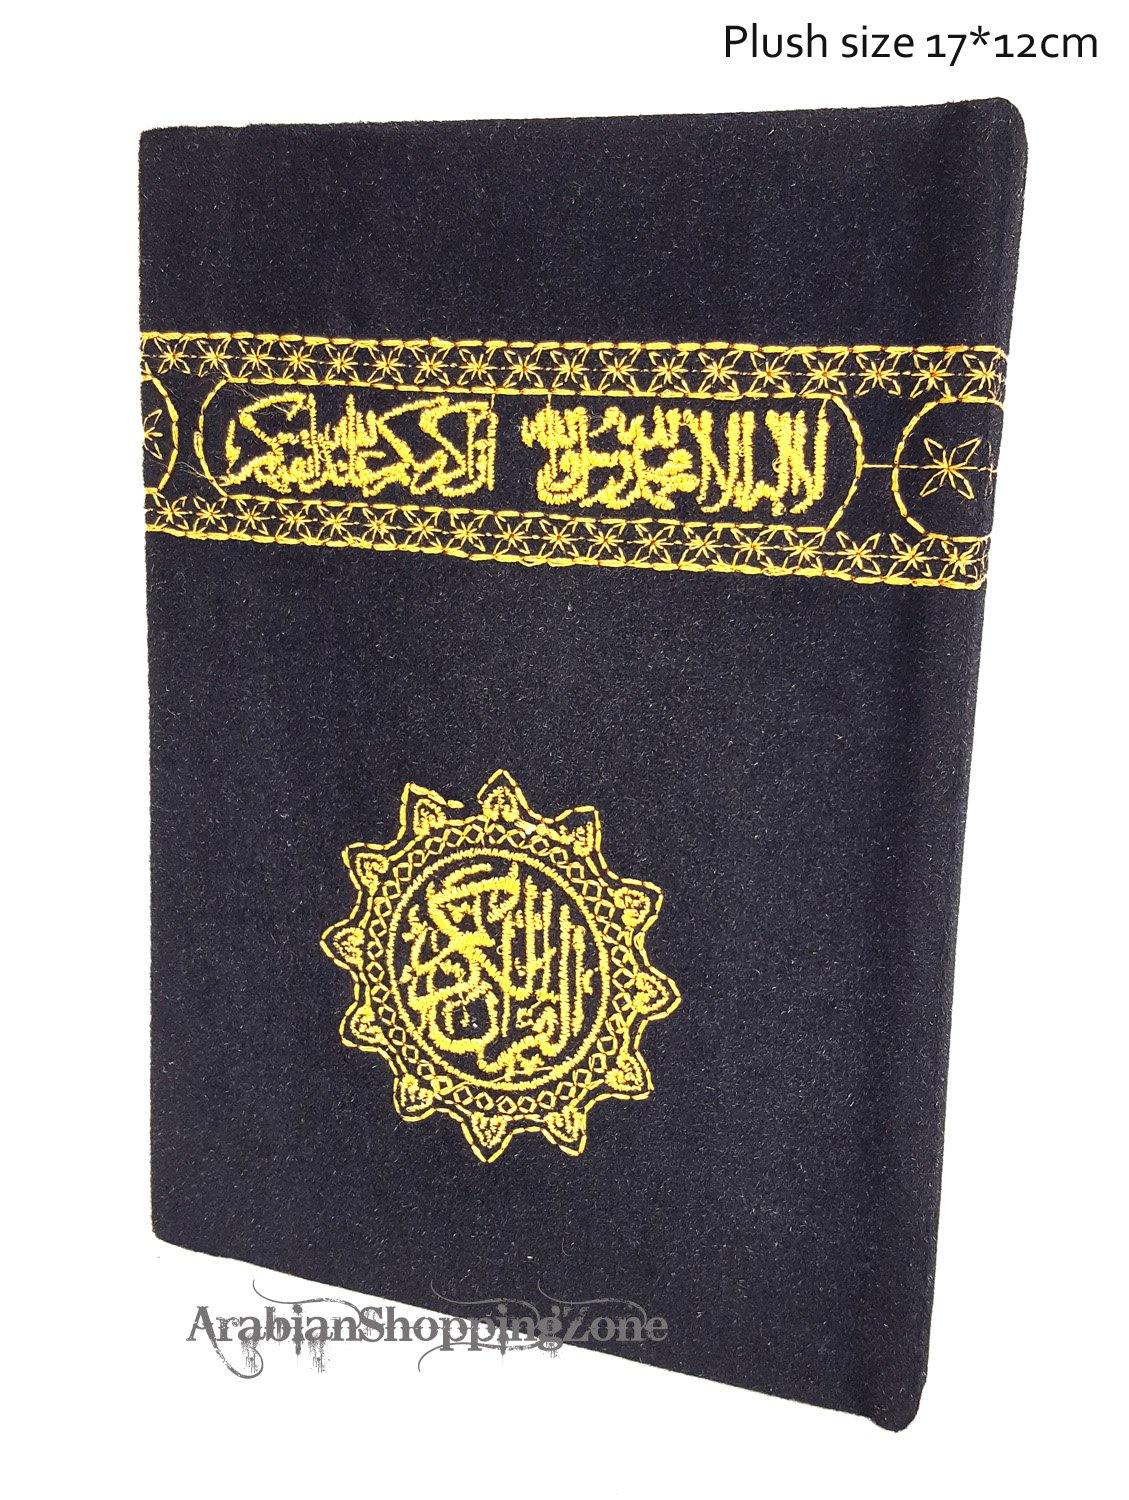 The Kabba Holy Quran 20*14cm